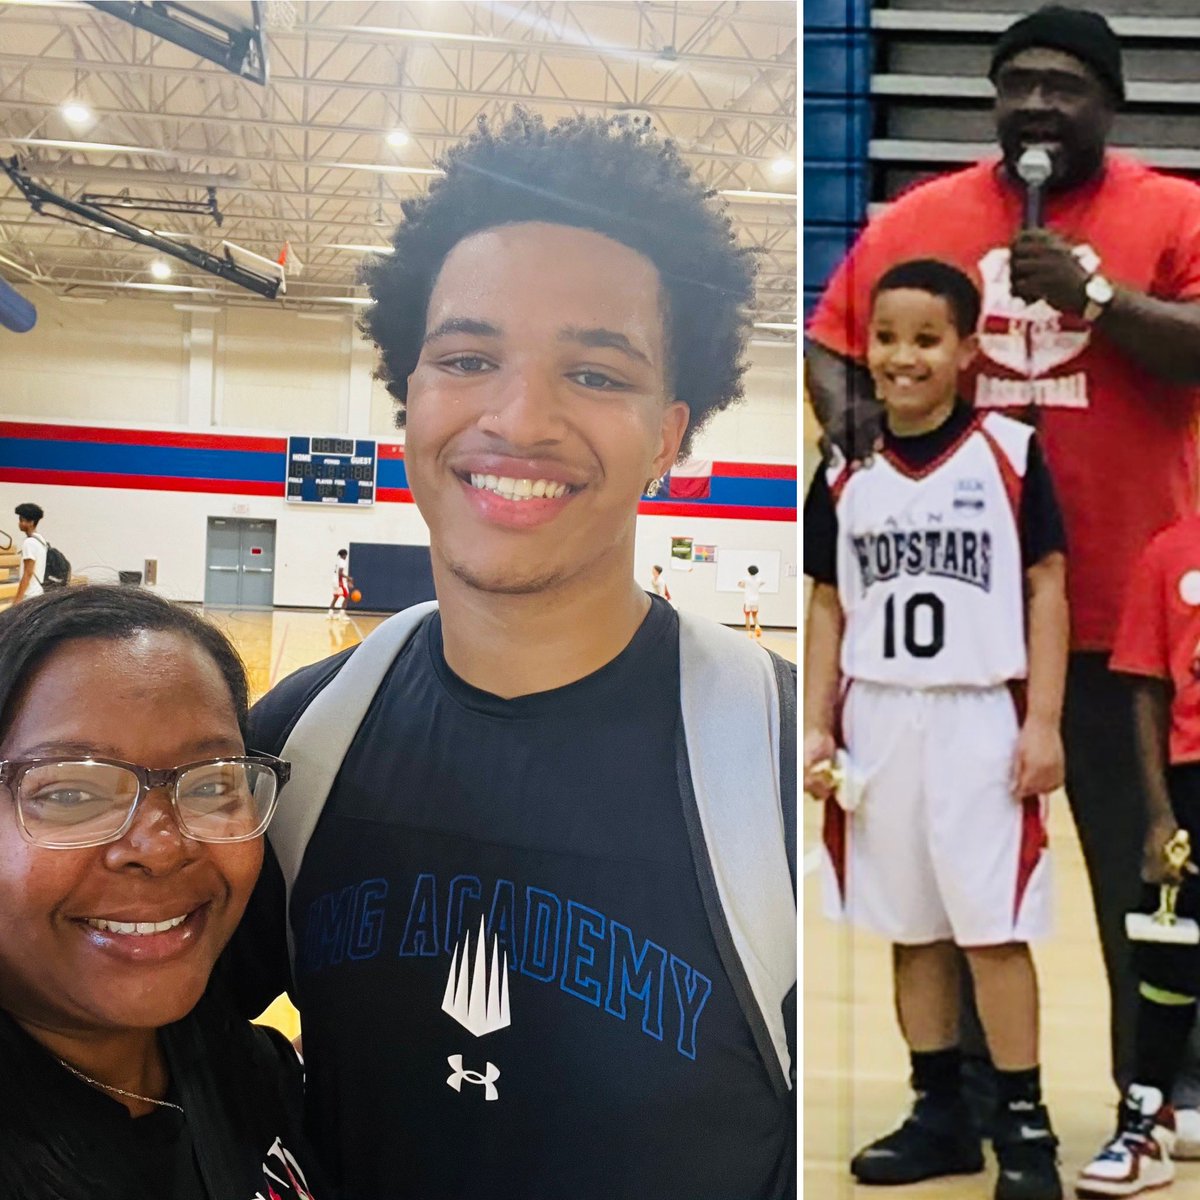 I LOVE my tribe! It’s always great to reconnect with friends who are family - FRAMILY! Andrea Hurt and I go waaaaaaay back when our boys were little tikes at 6 and 7yo. Her husband Fred was Ean’s first 🏀 coach in Indy and laid the foundation for my mini-me’s athletic